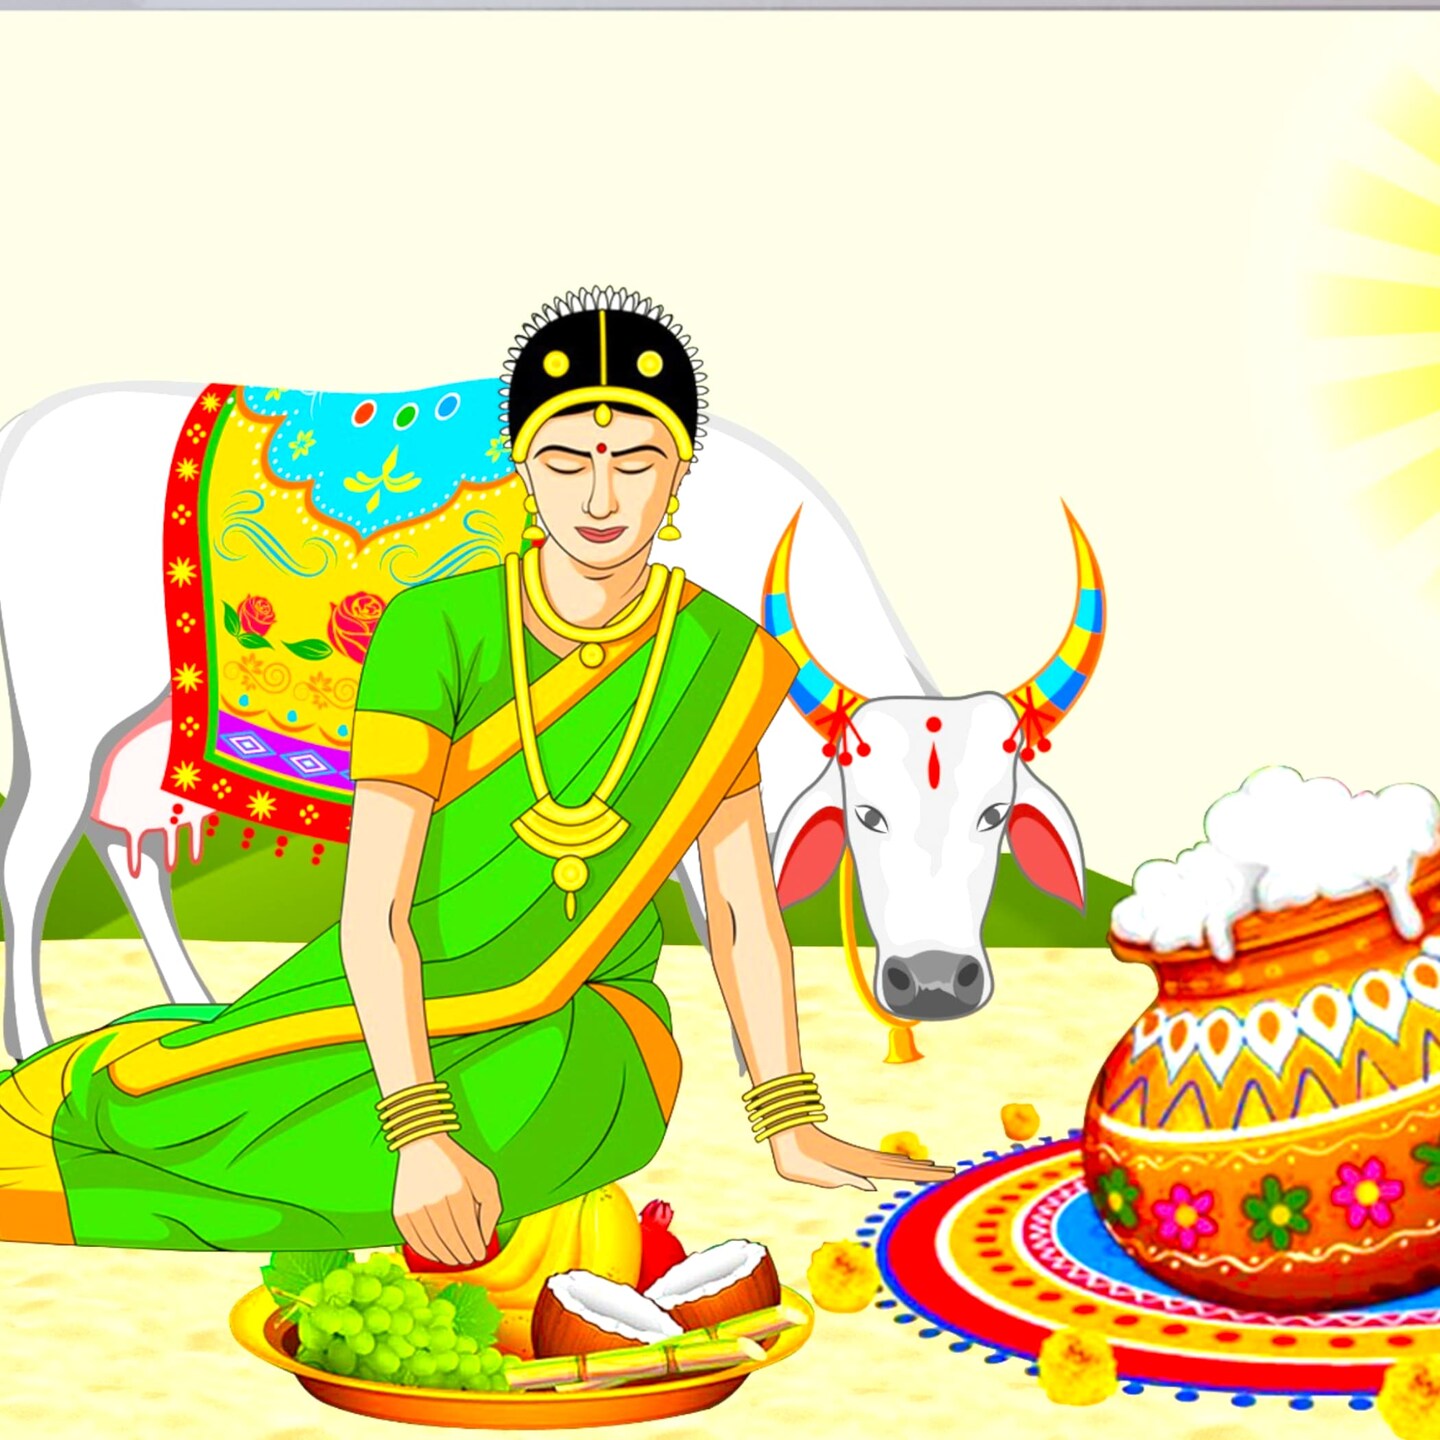 Pongal cow drawing